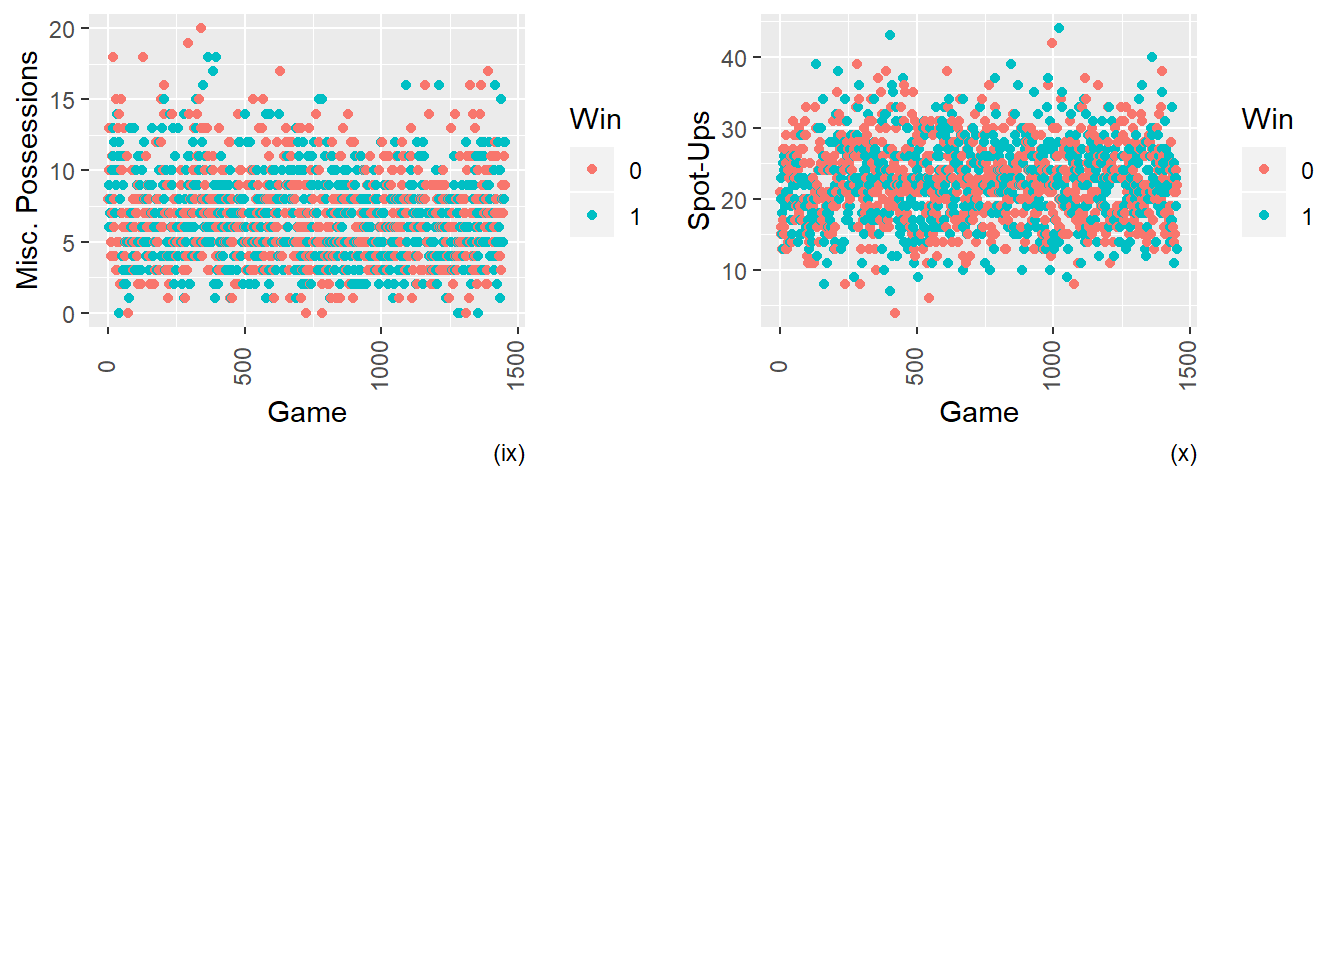 Scatterplots of certain Play Types vs. Wins (1) or Losses (0)